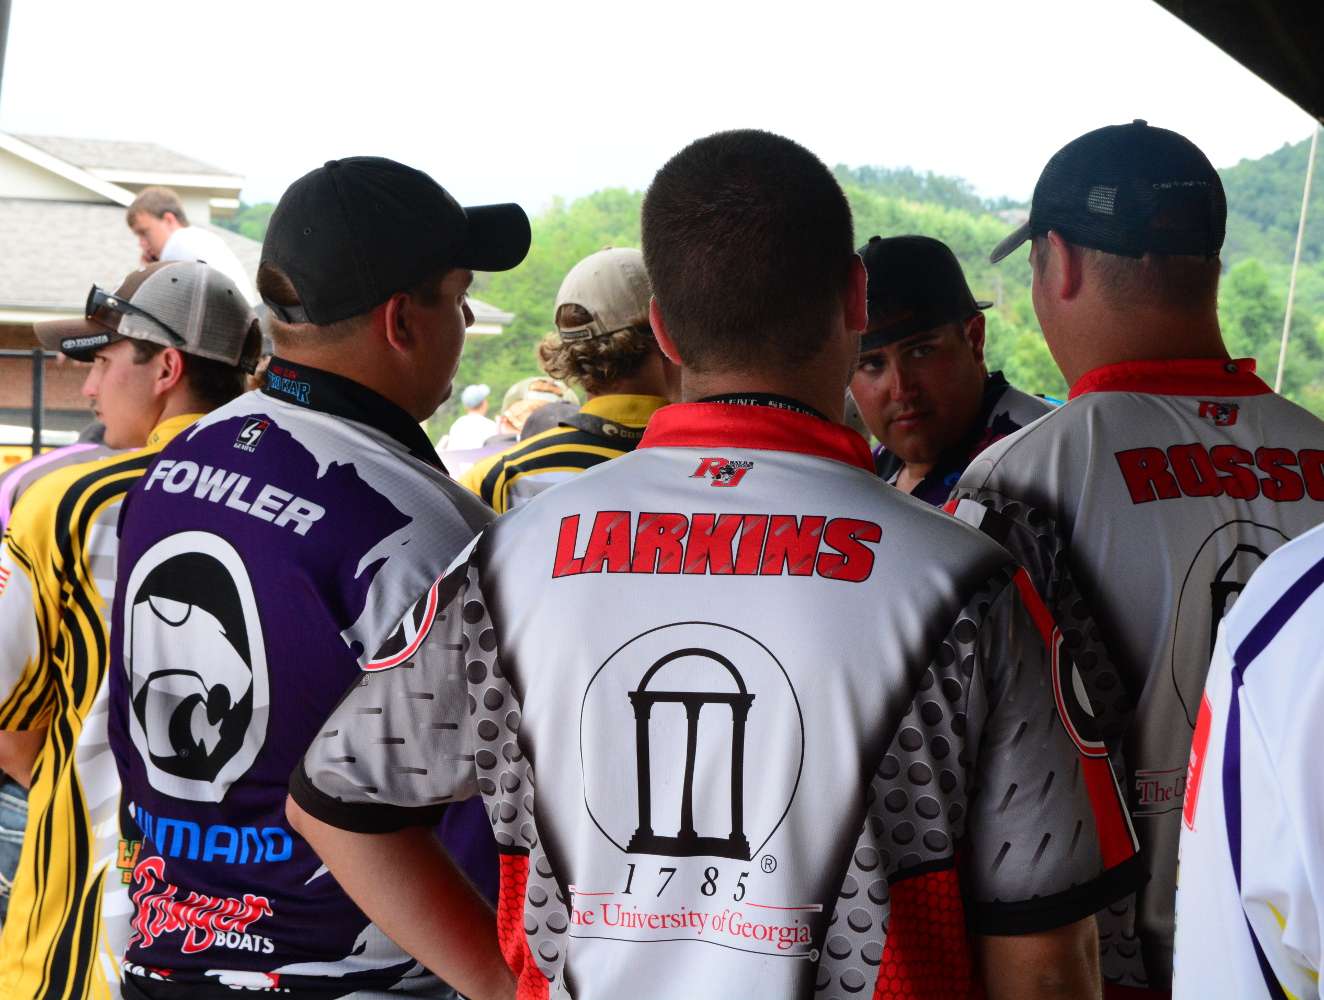 The competitors engage in serious conversation before making it to the stage.